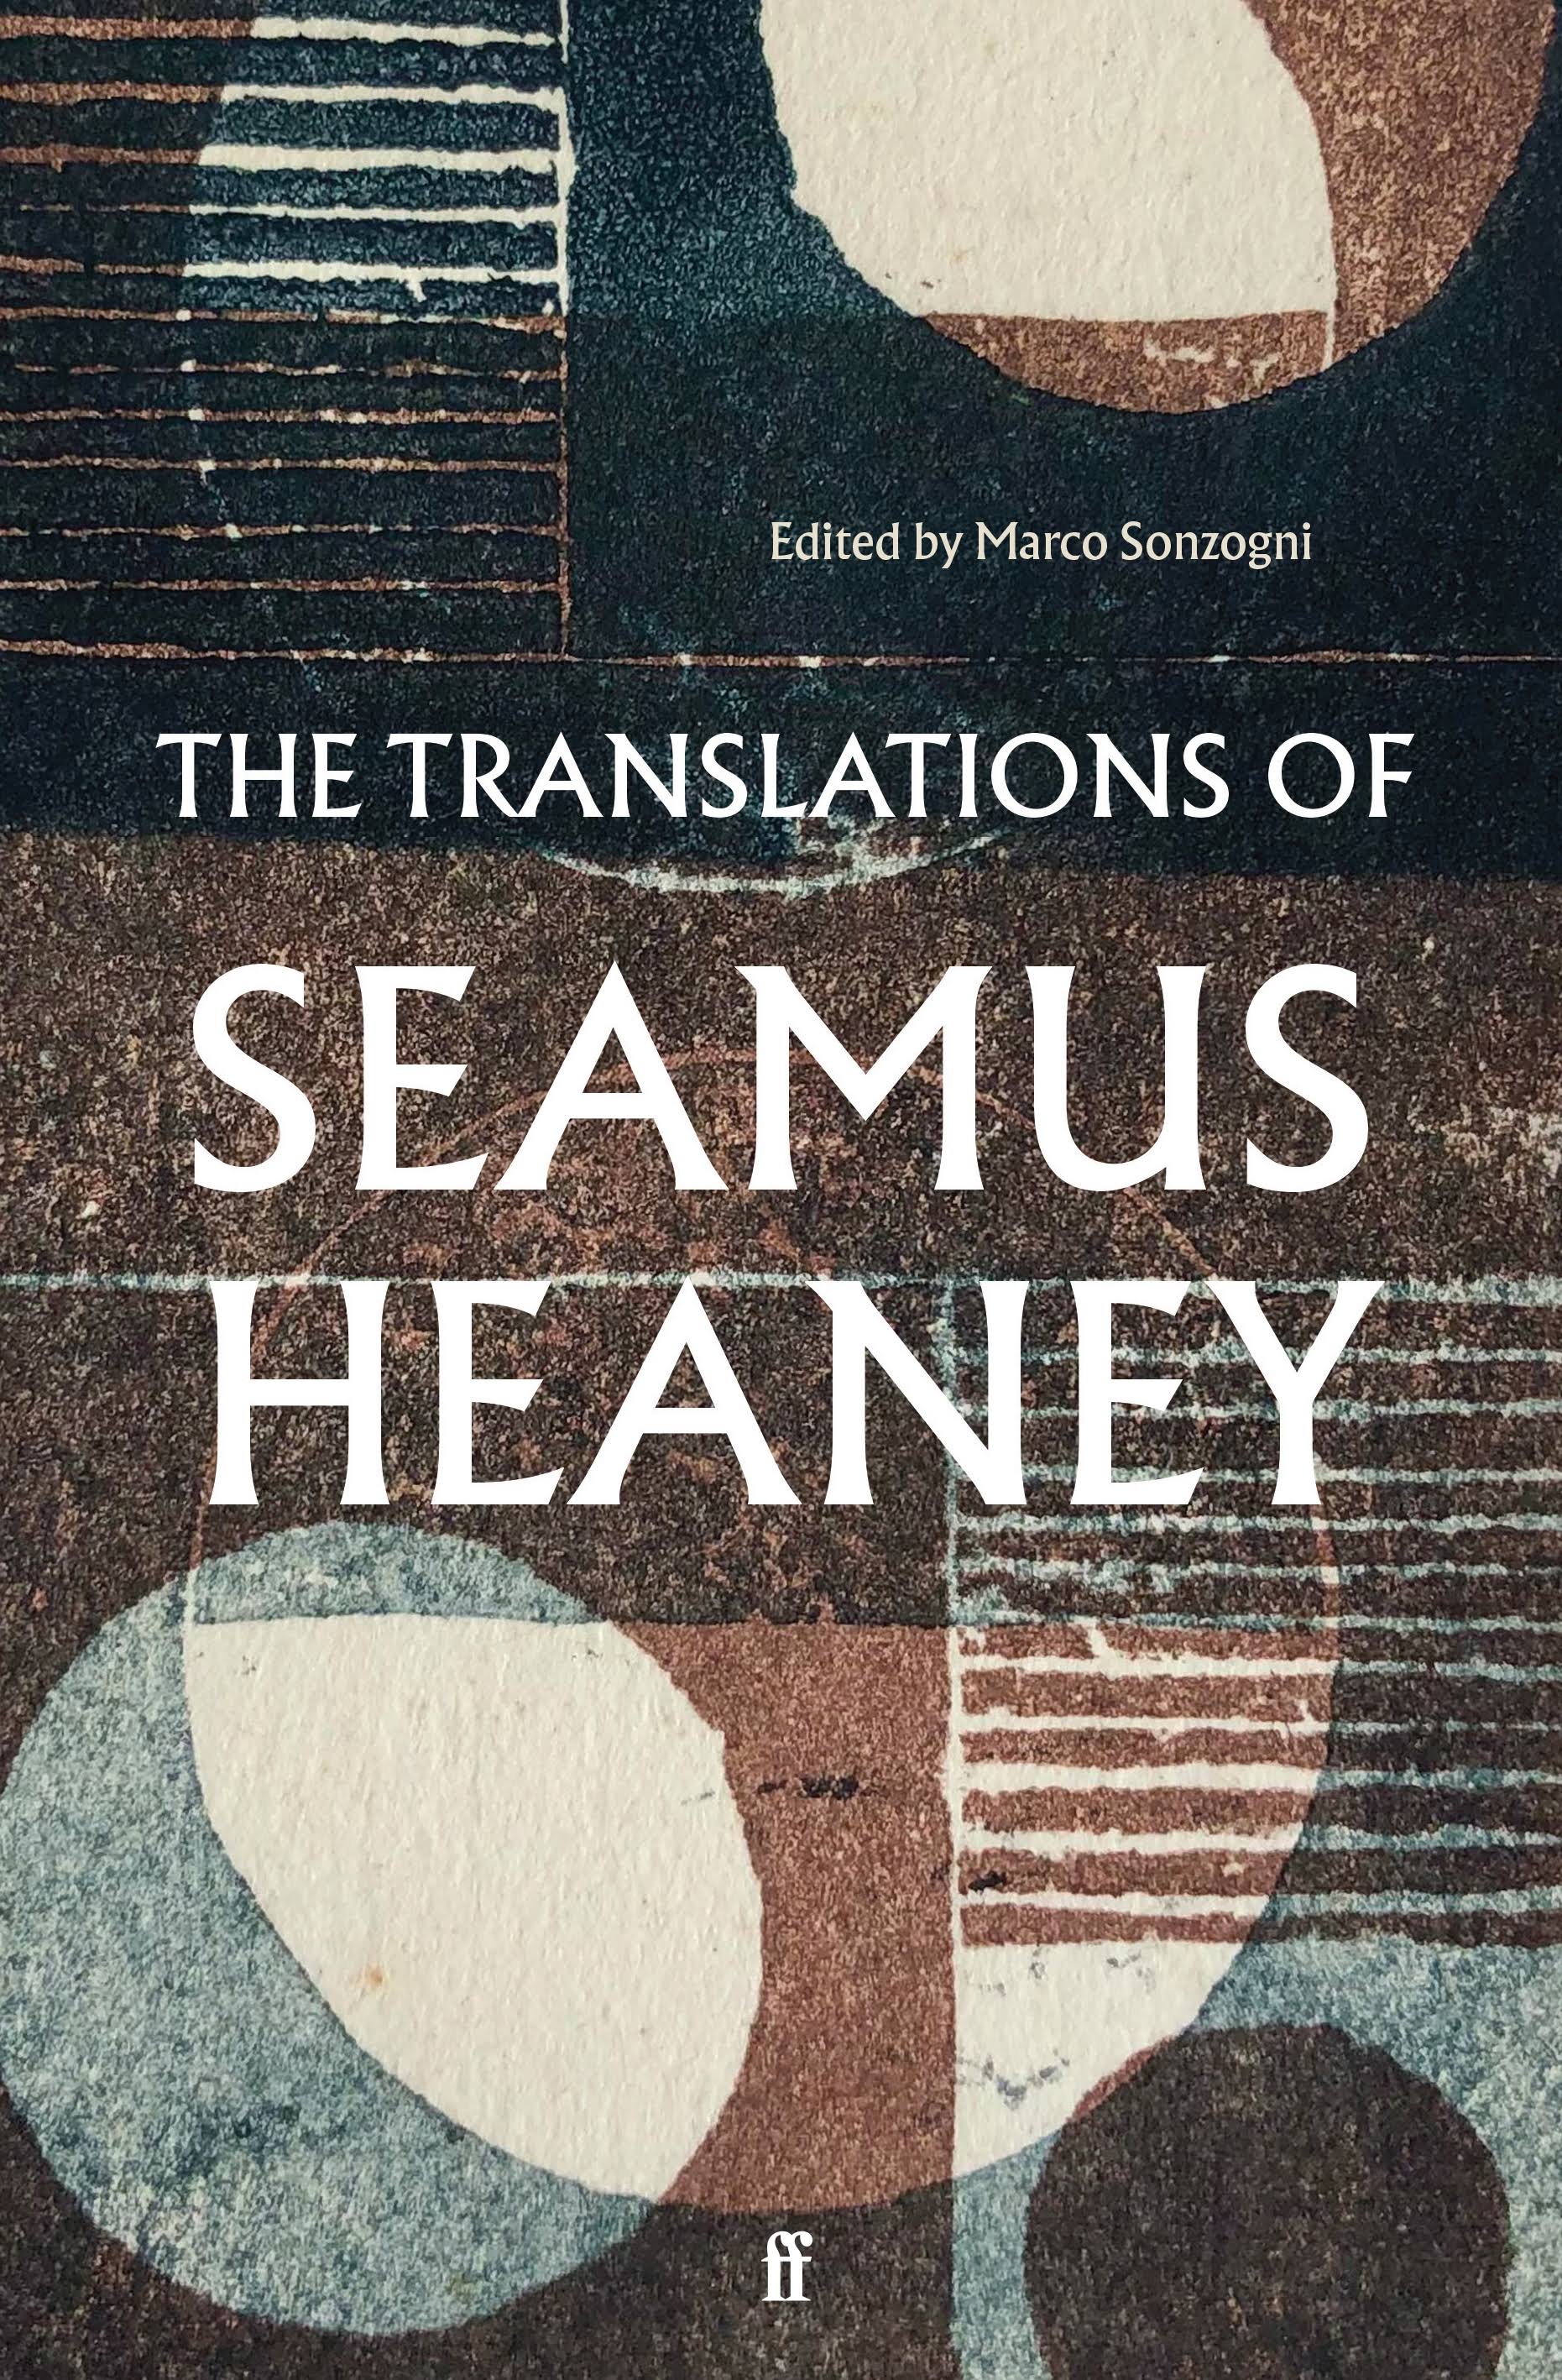 The Translations of Seamus Heaney [Book]